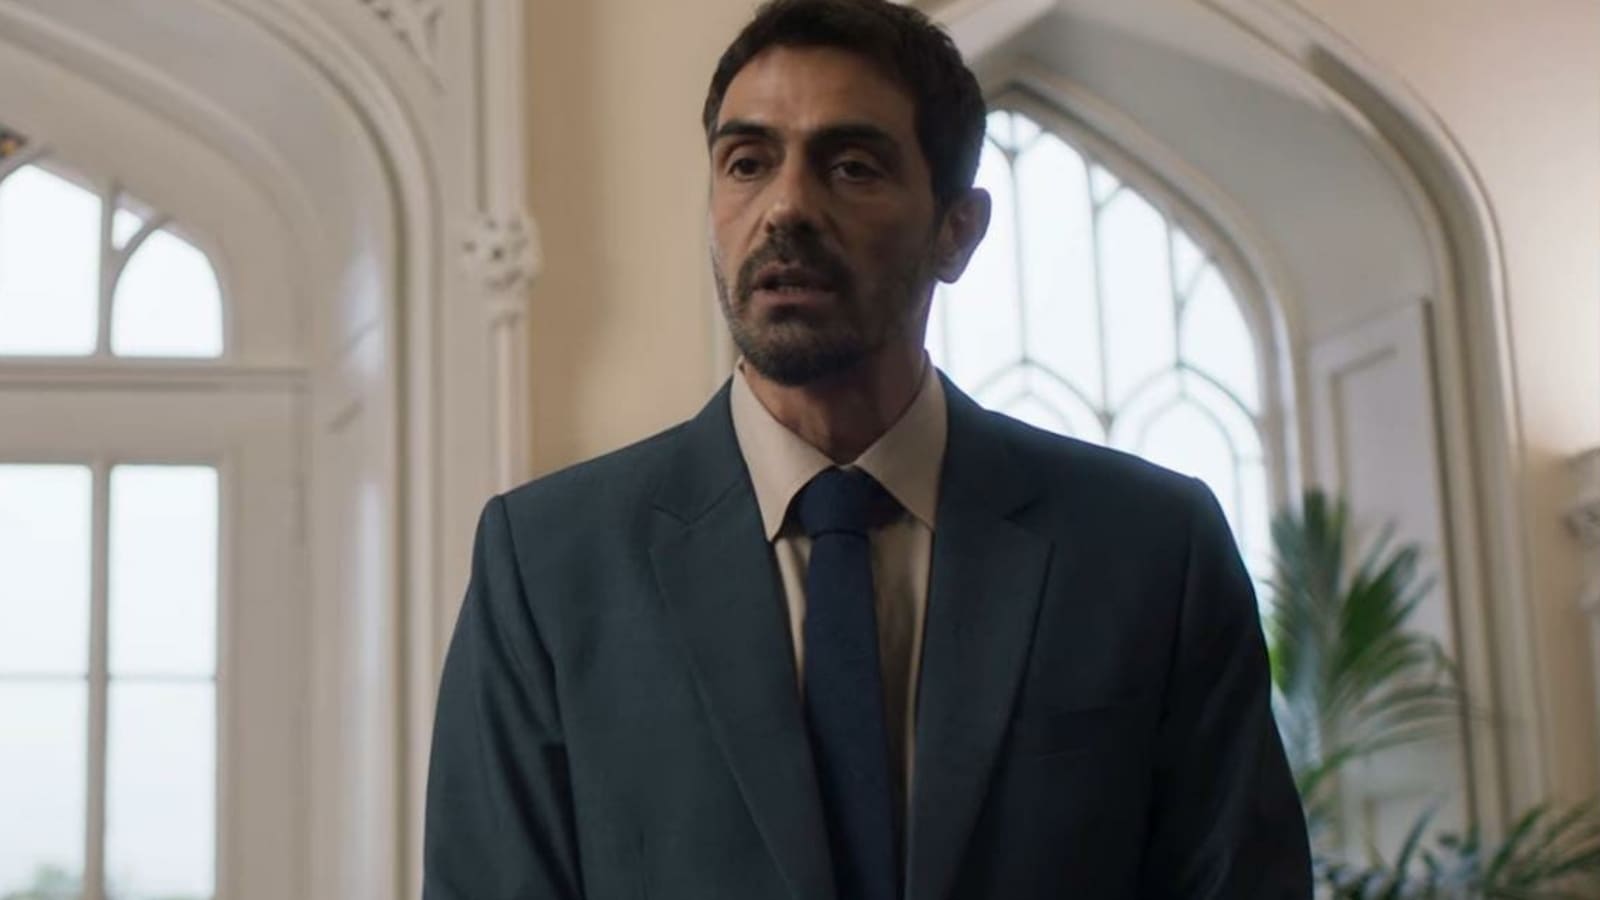 London Files teaser: Arjun Rampal's detective uncovers dark mystery while on hunt for a missing girl. Watch | Web Series - Hindustan Times